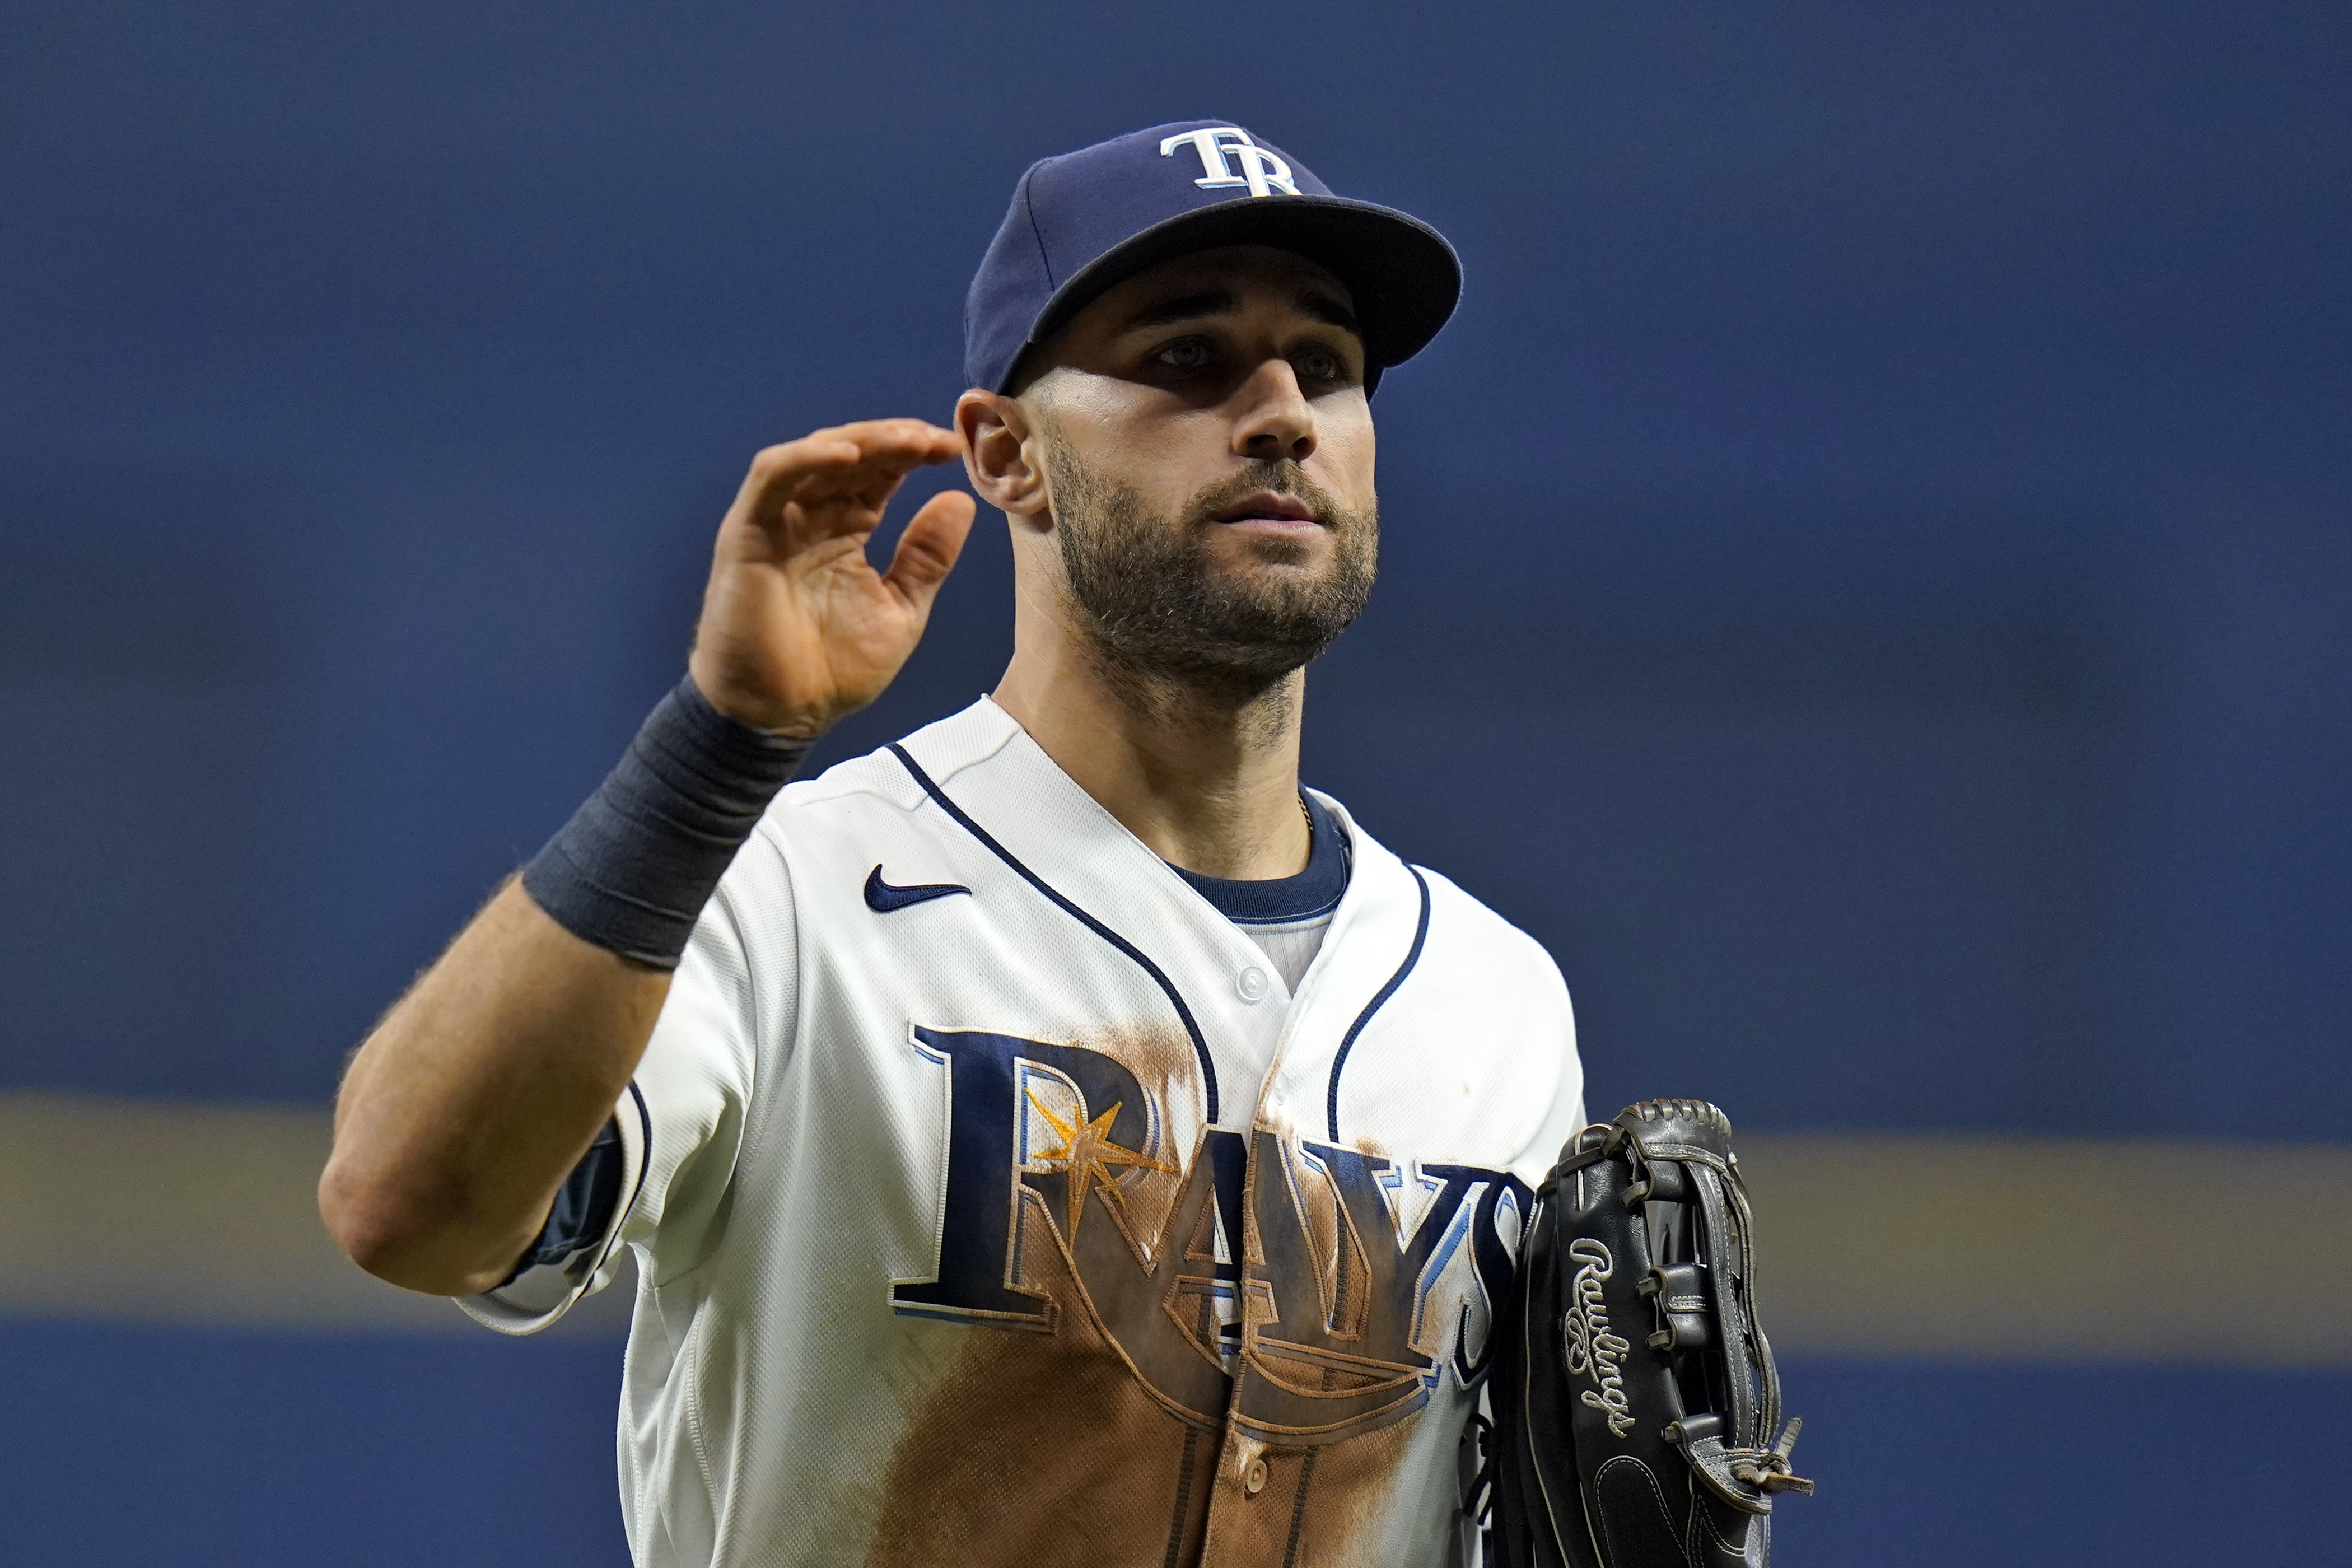 Rays' Cash apologizes after Kiermaier takes, keeps data card